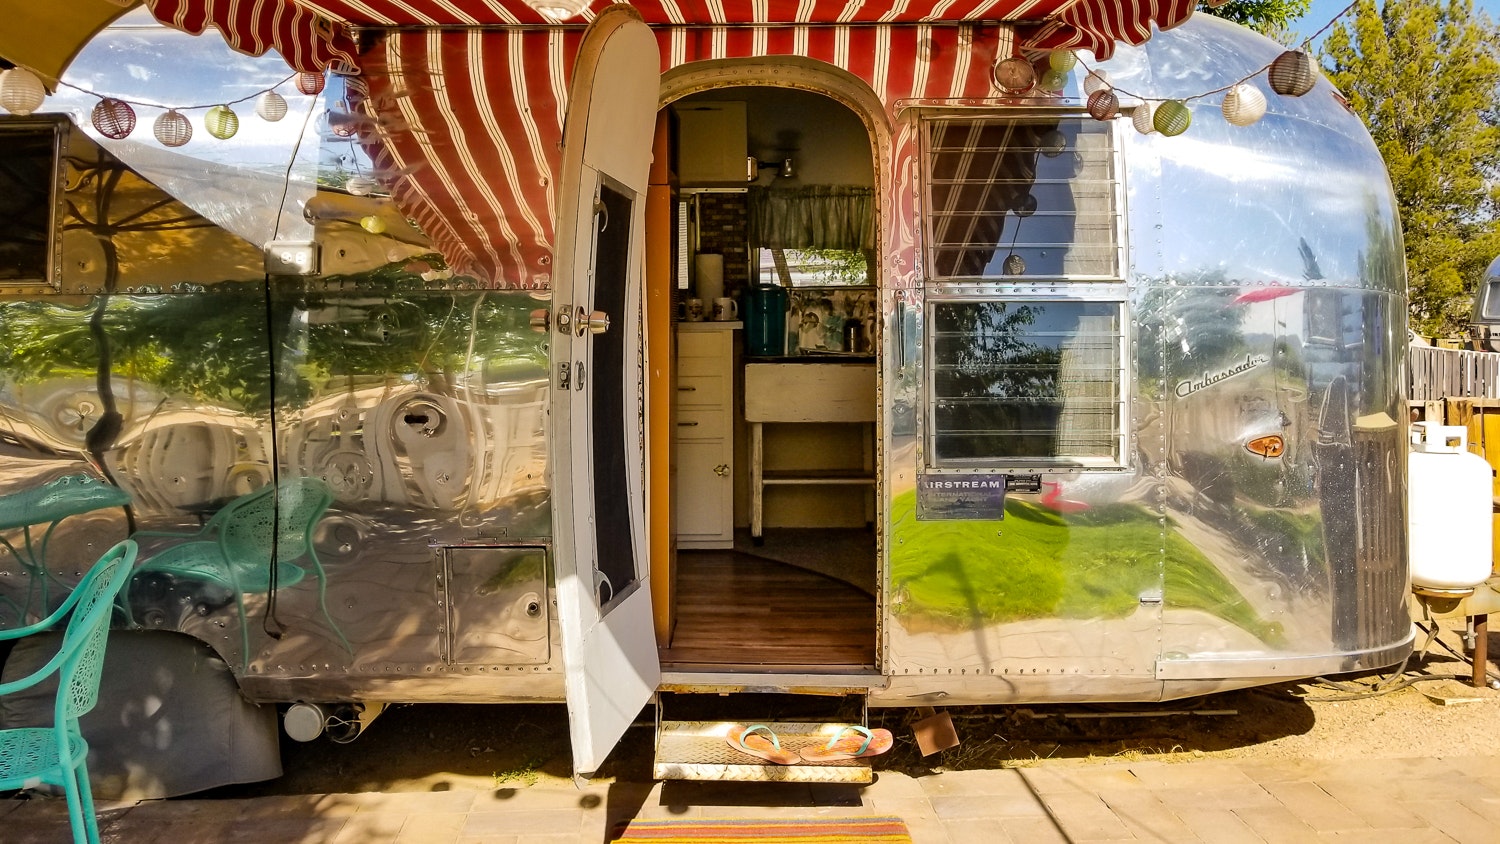 The open door of a chrome Airstream trailer